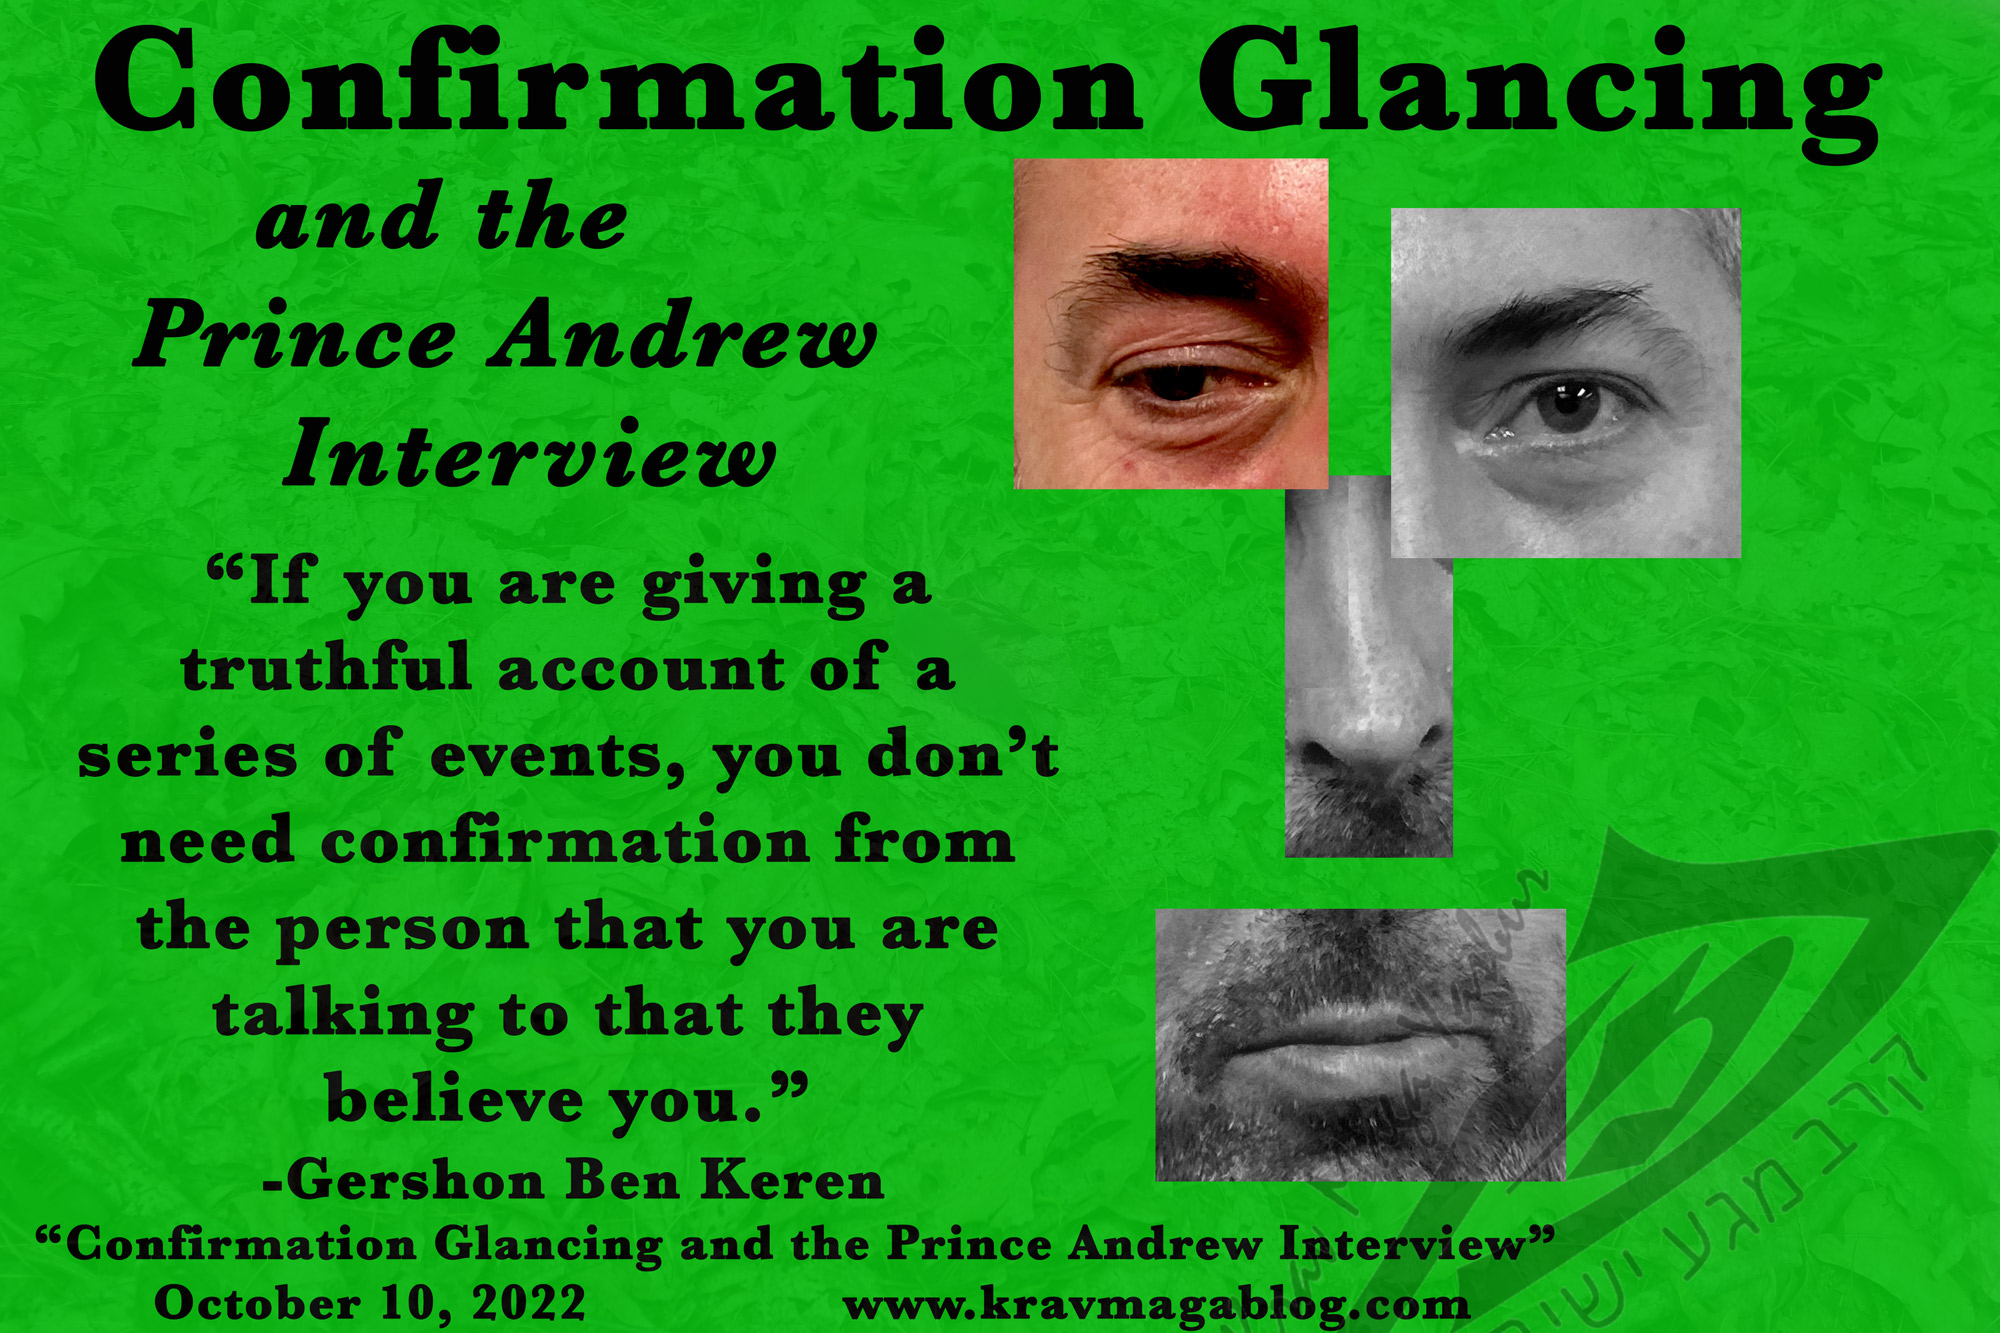 Blog About Confirmation Glancing & The Prince Andrew Interview